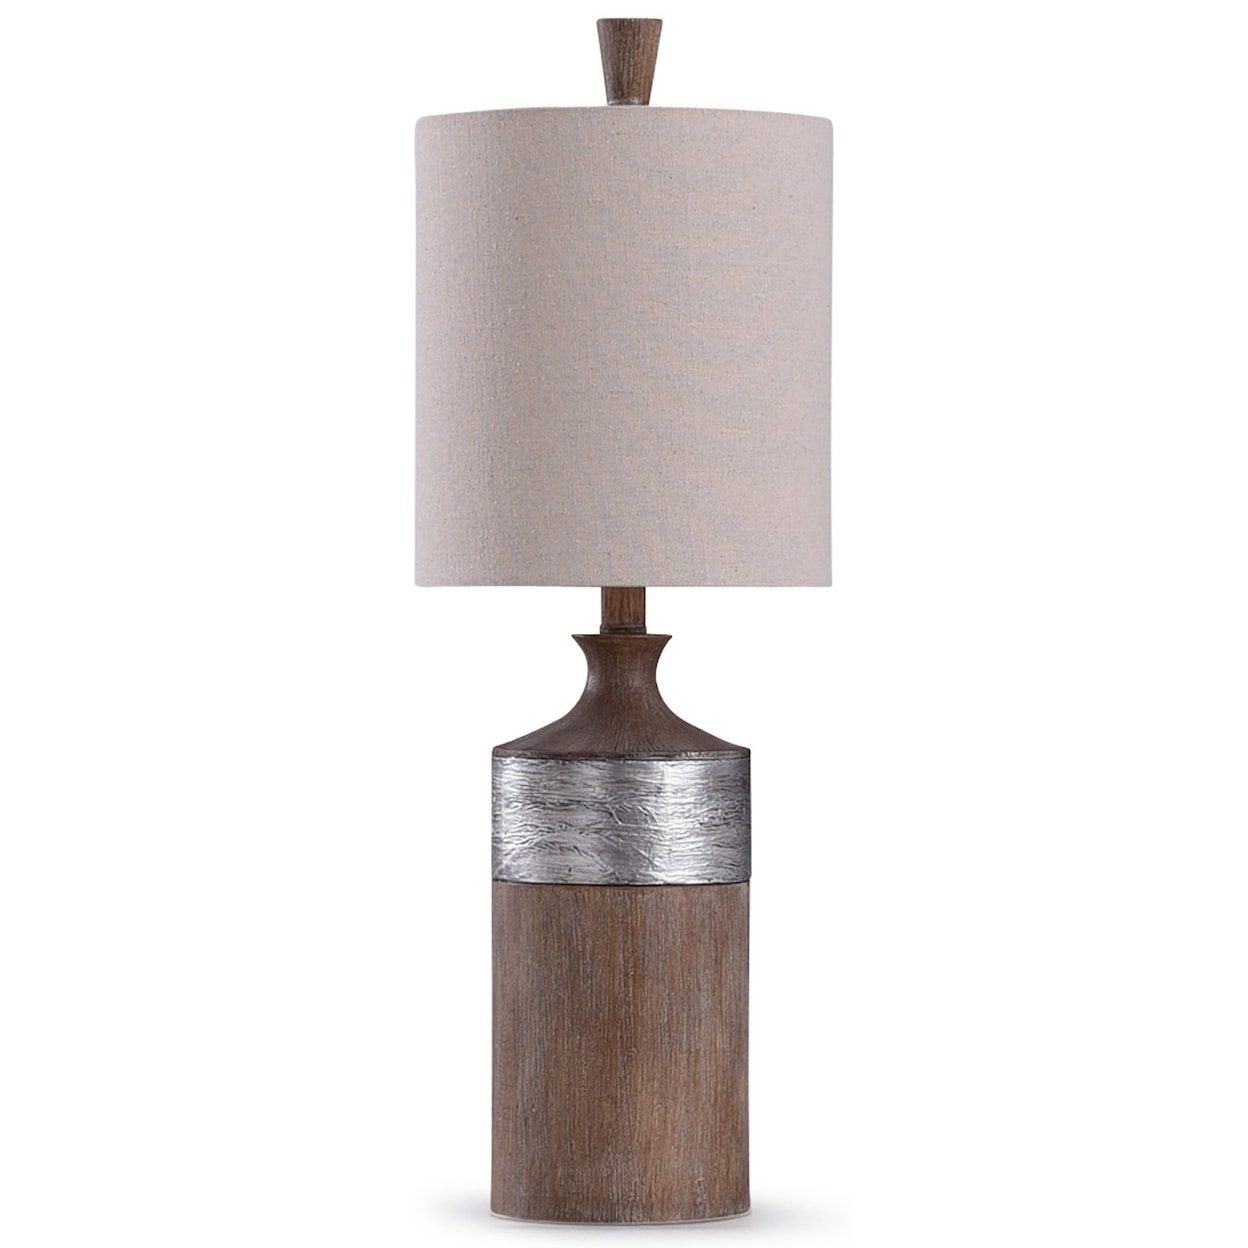 StyleCraft Lamps Darley Table Lamp